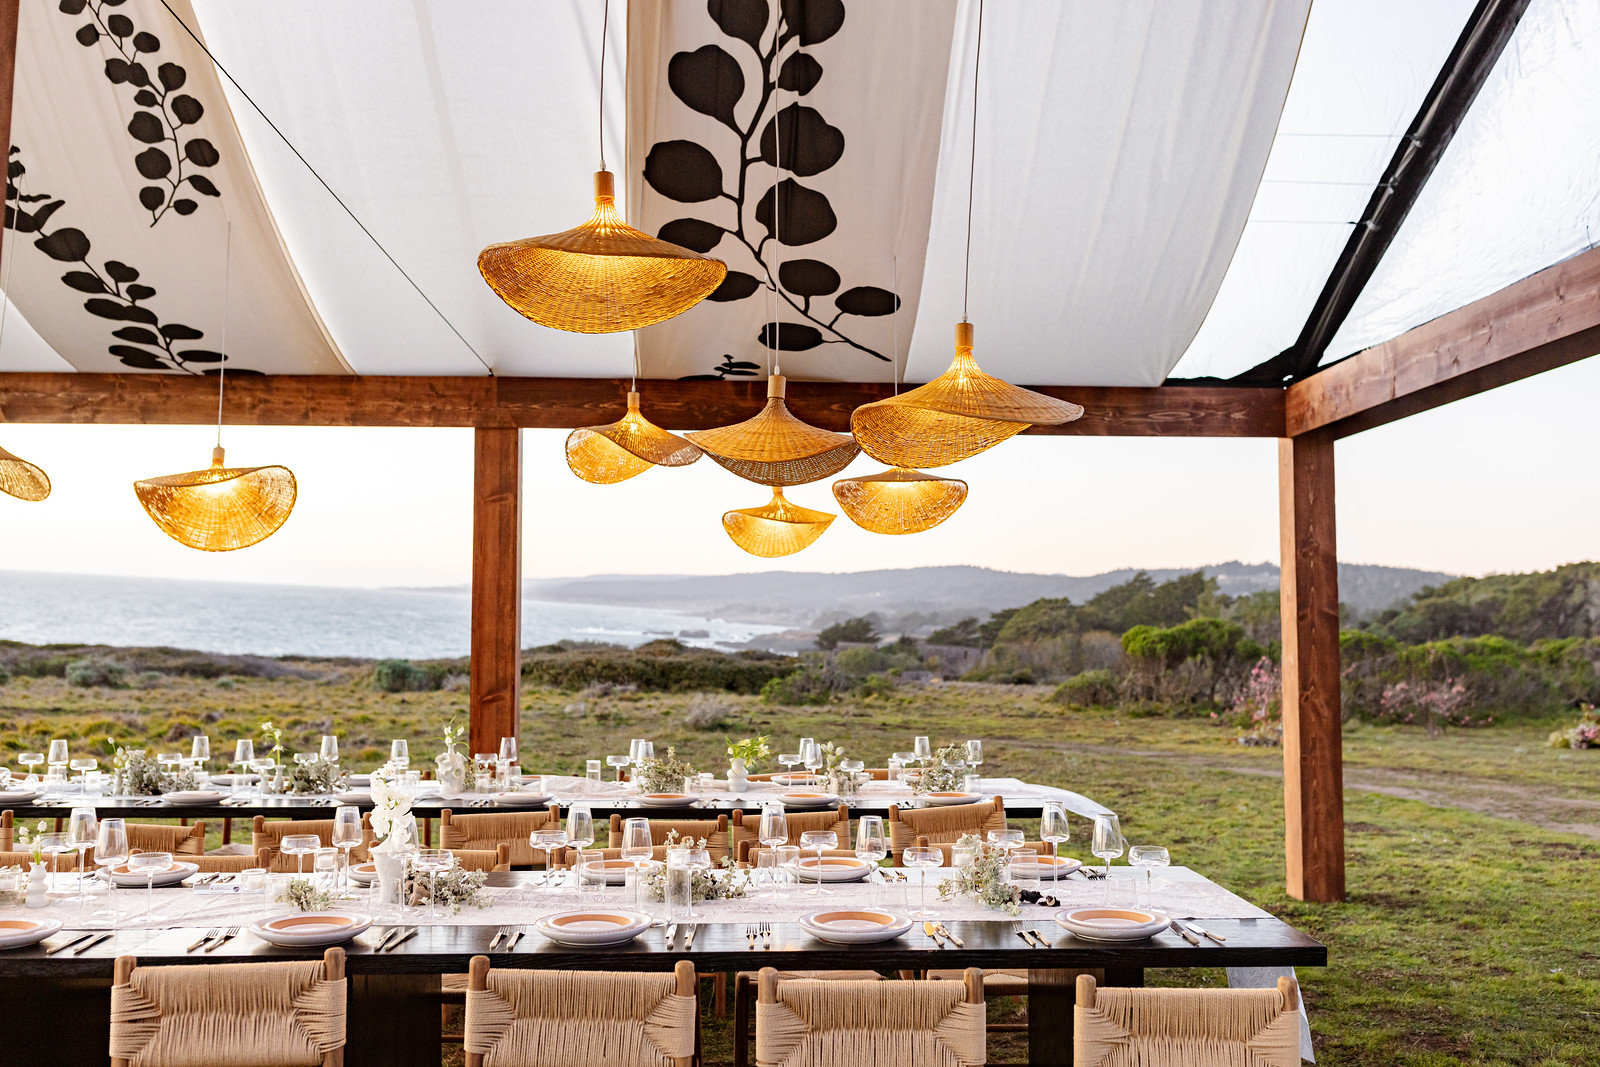 An outdoor banquet table with a cloth tent and orange lights above